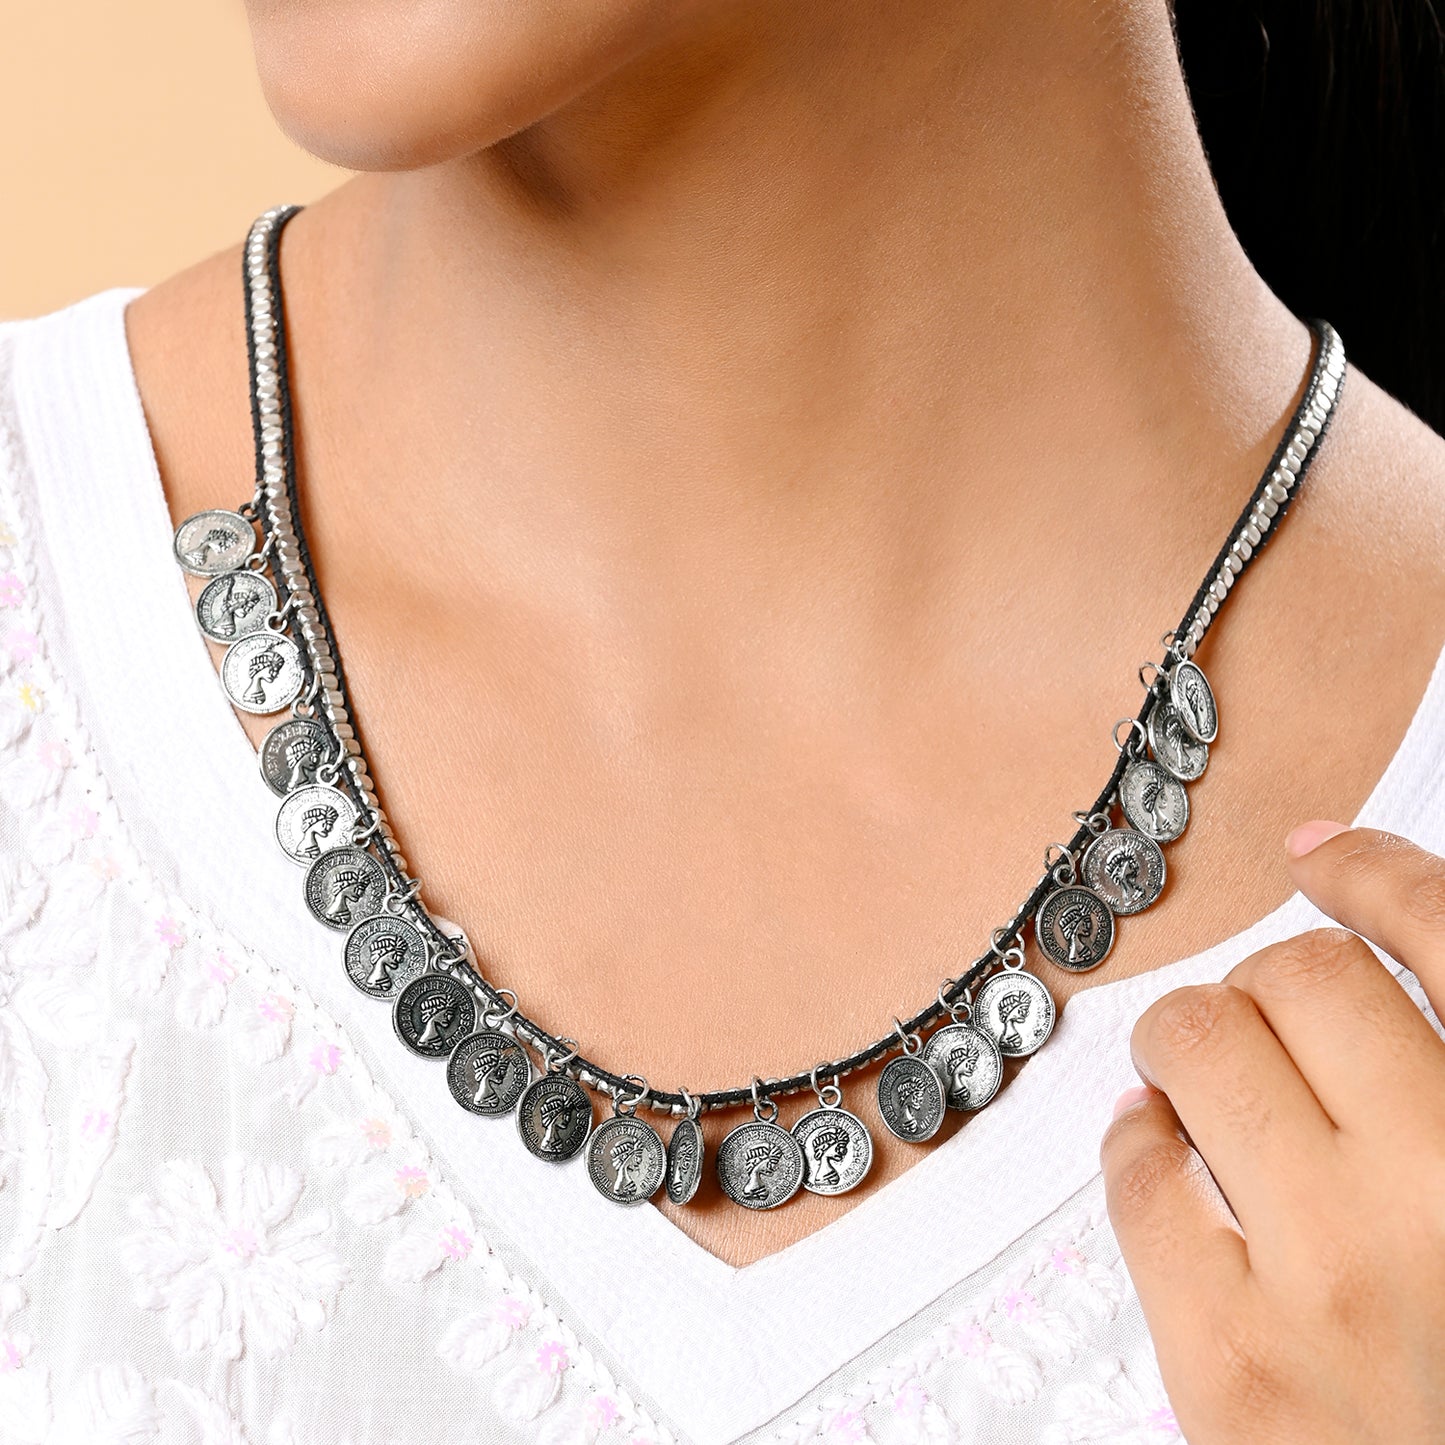 Antique Coins Of Heritage Necklace